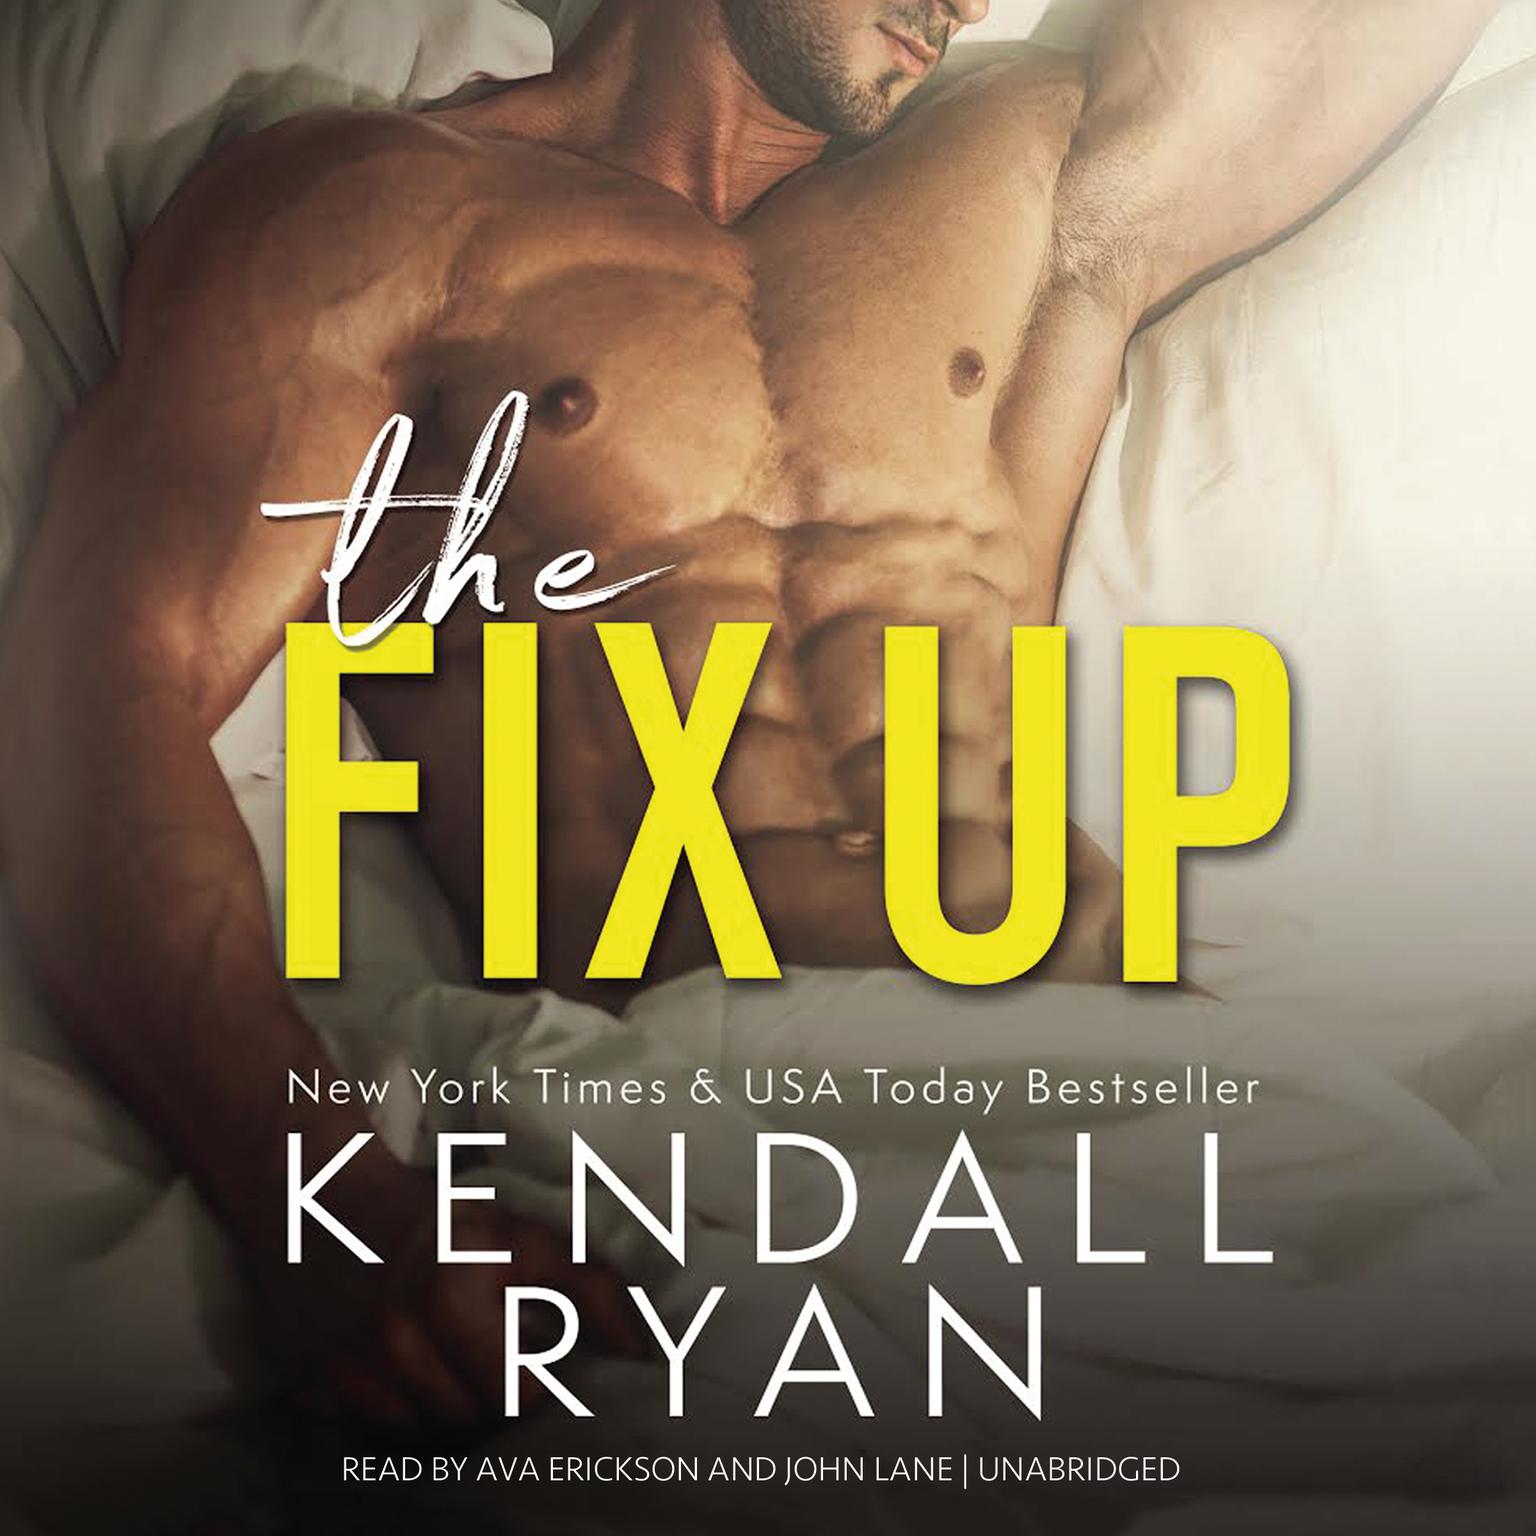 The Fix Up Audiobook, by Kendall Ryan